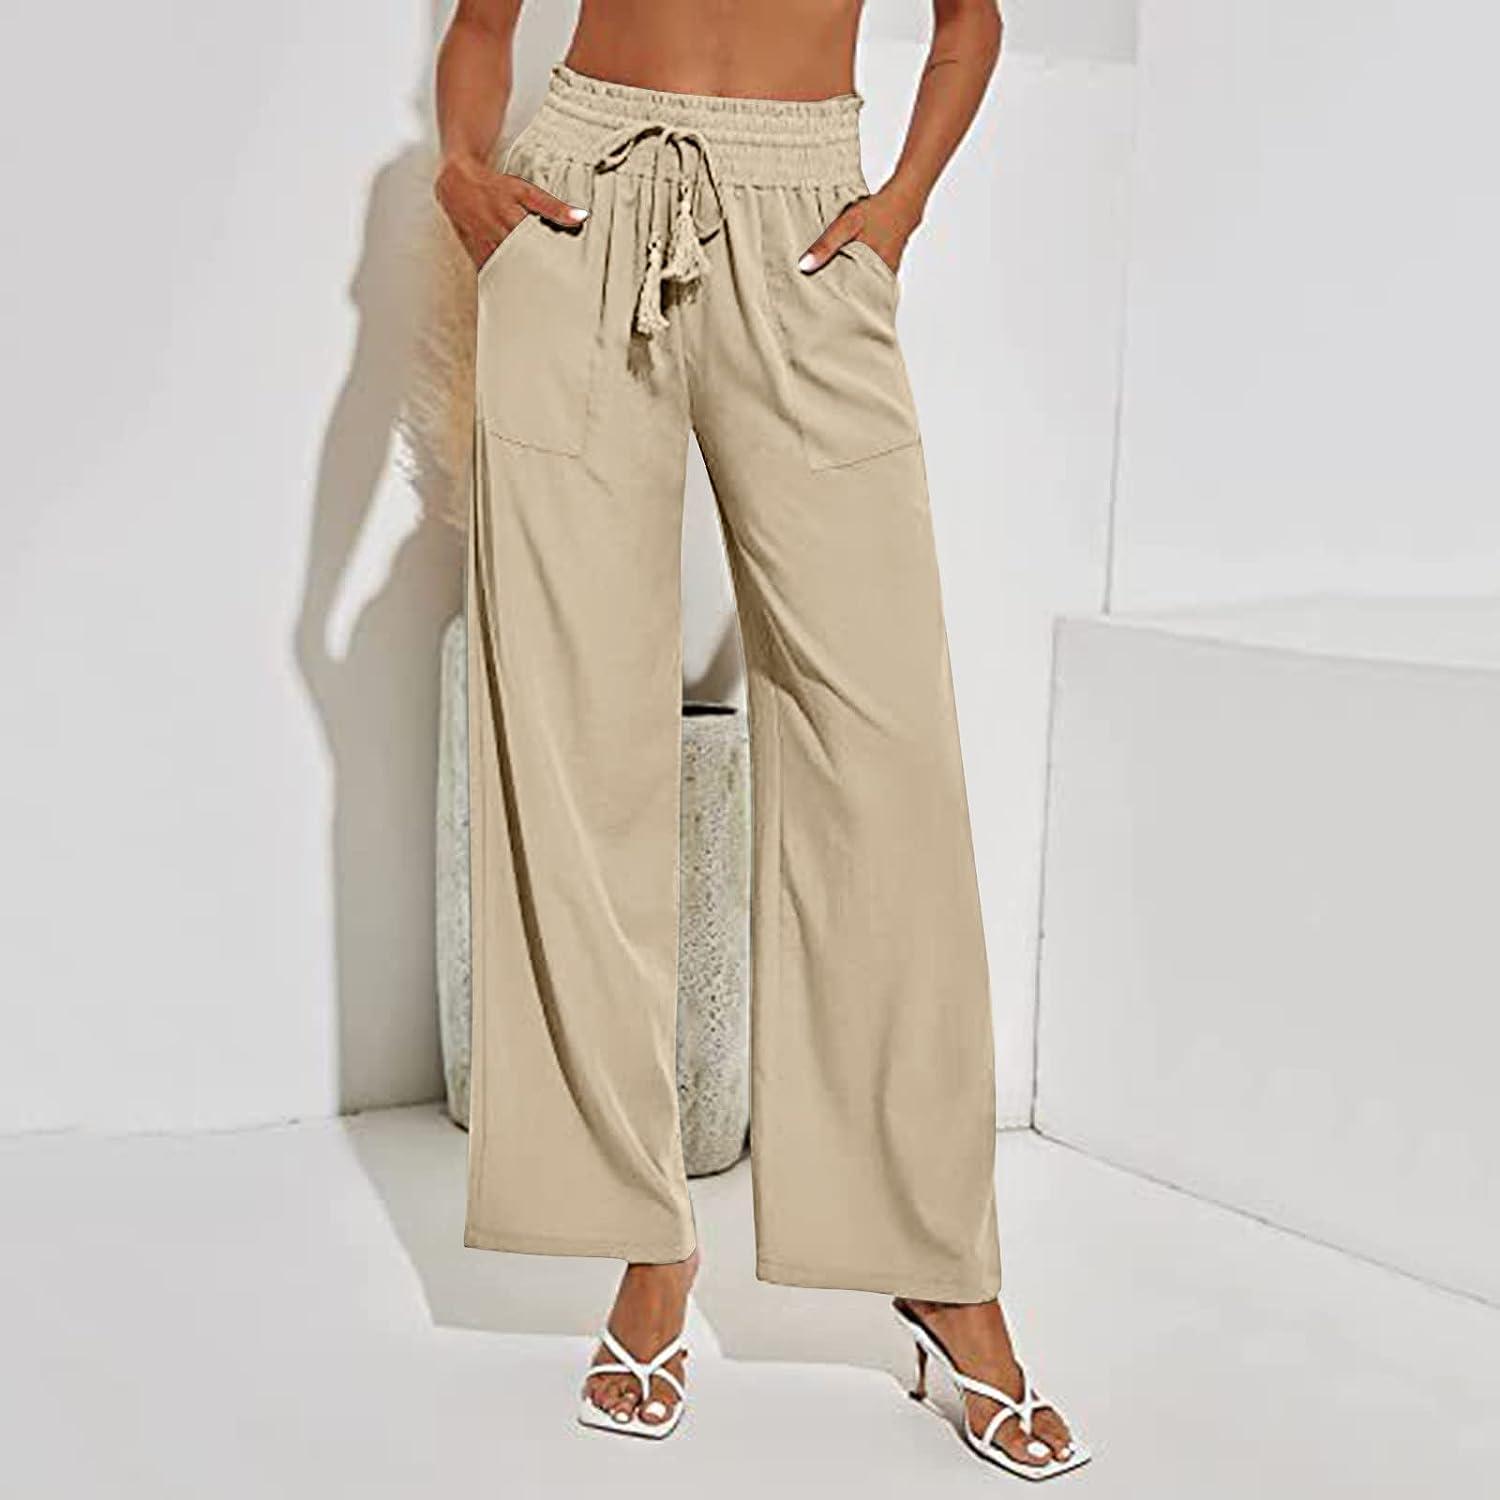 Buy Brown and Denim Combo of 2 Women Straight Trousers Cotton for Best  Price, Reviews, Free Shipping